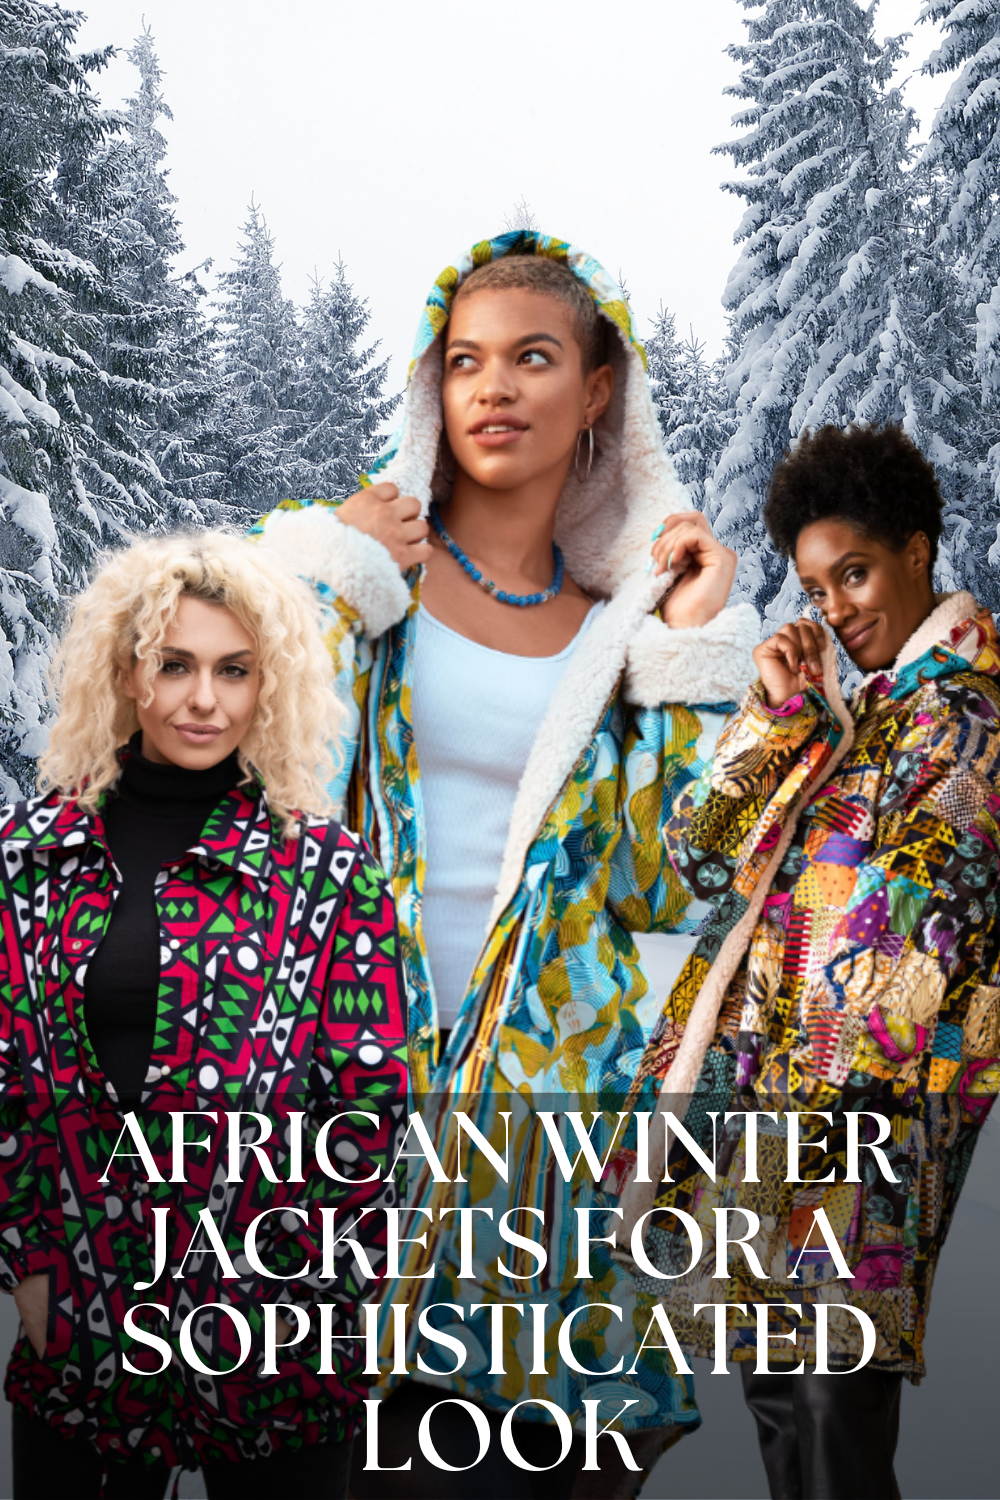 20 Best African Winter Jackets For A Sophisticated Look - I Wear ...